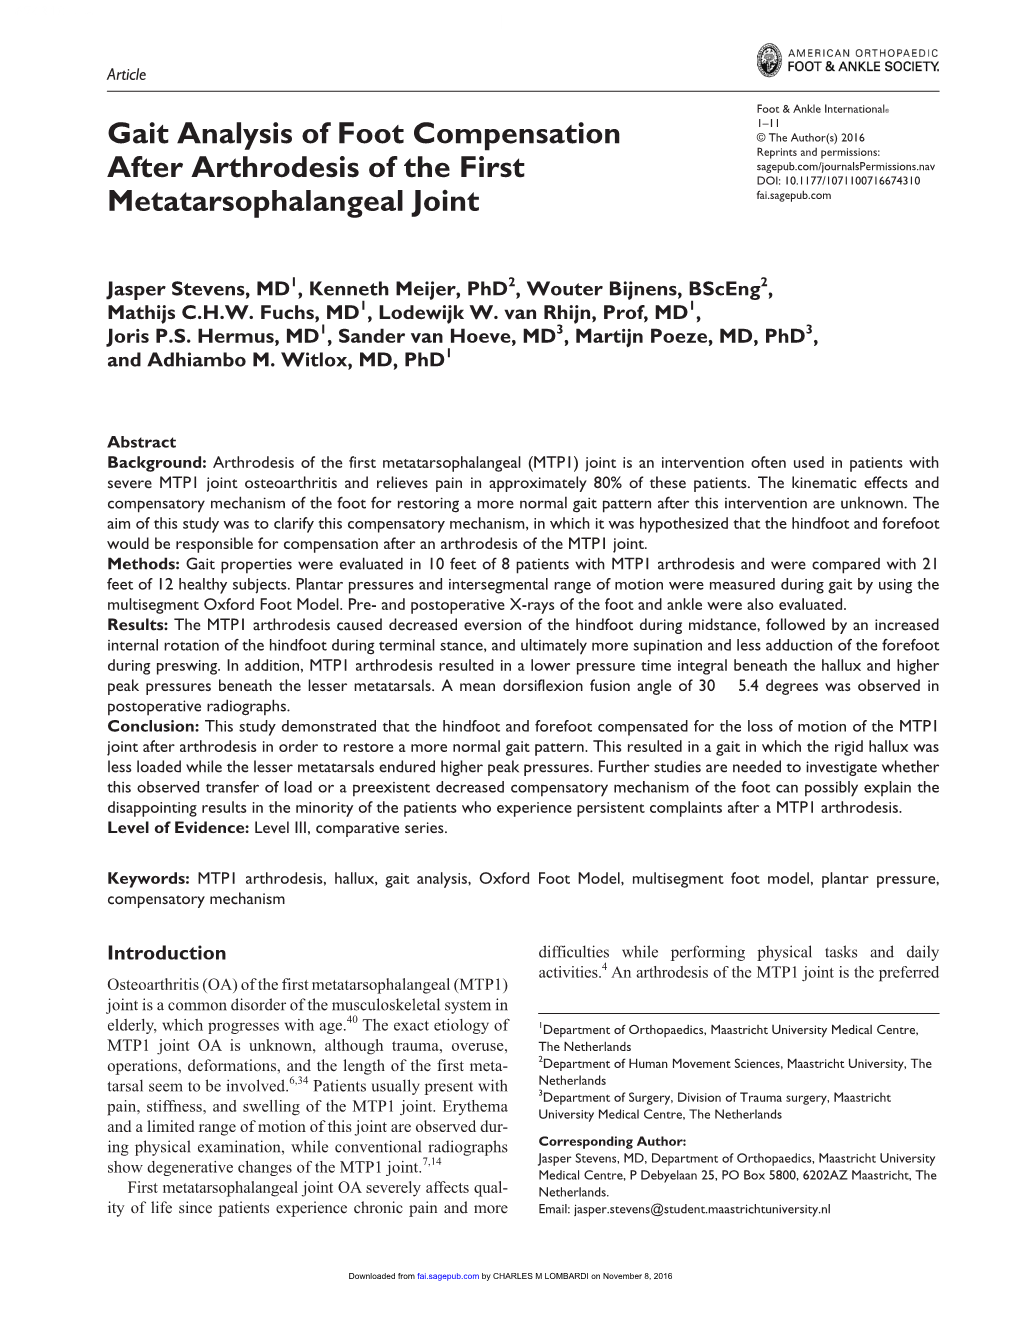 Gait Analysis of Foot Compensation After Arthrodesis of the First Metatarsophalangeal Joint